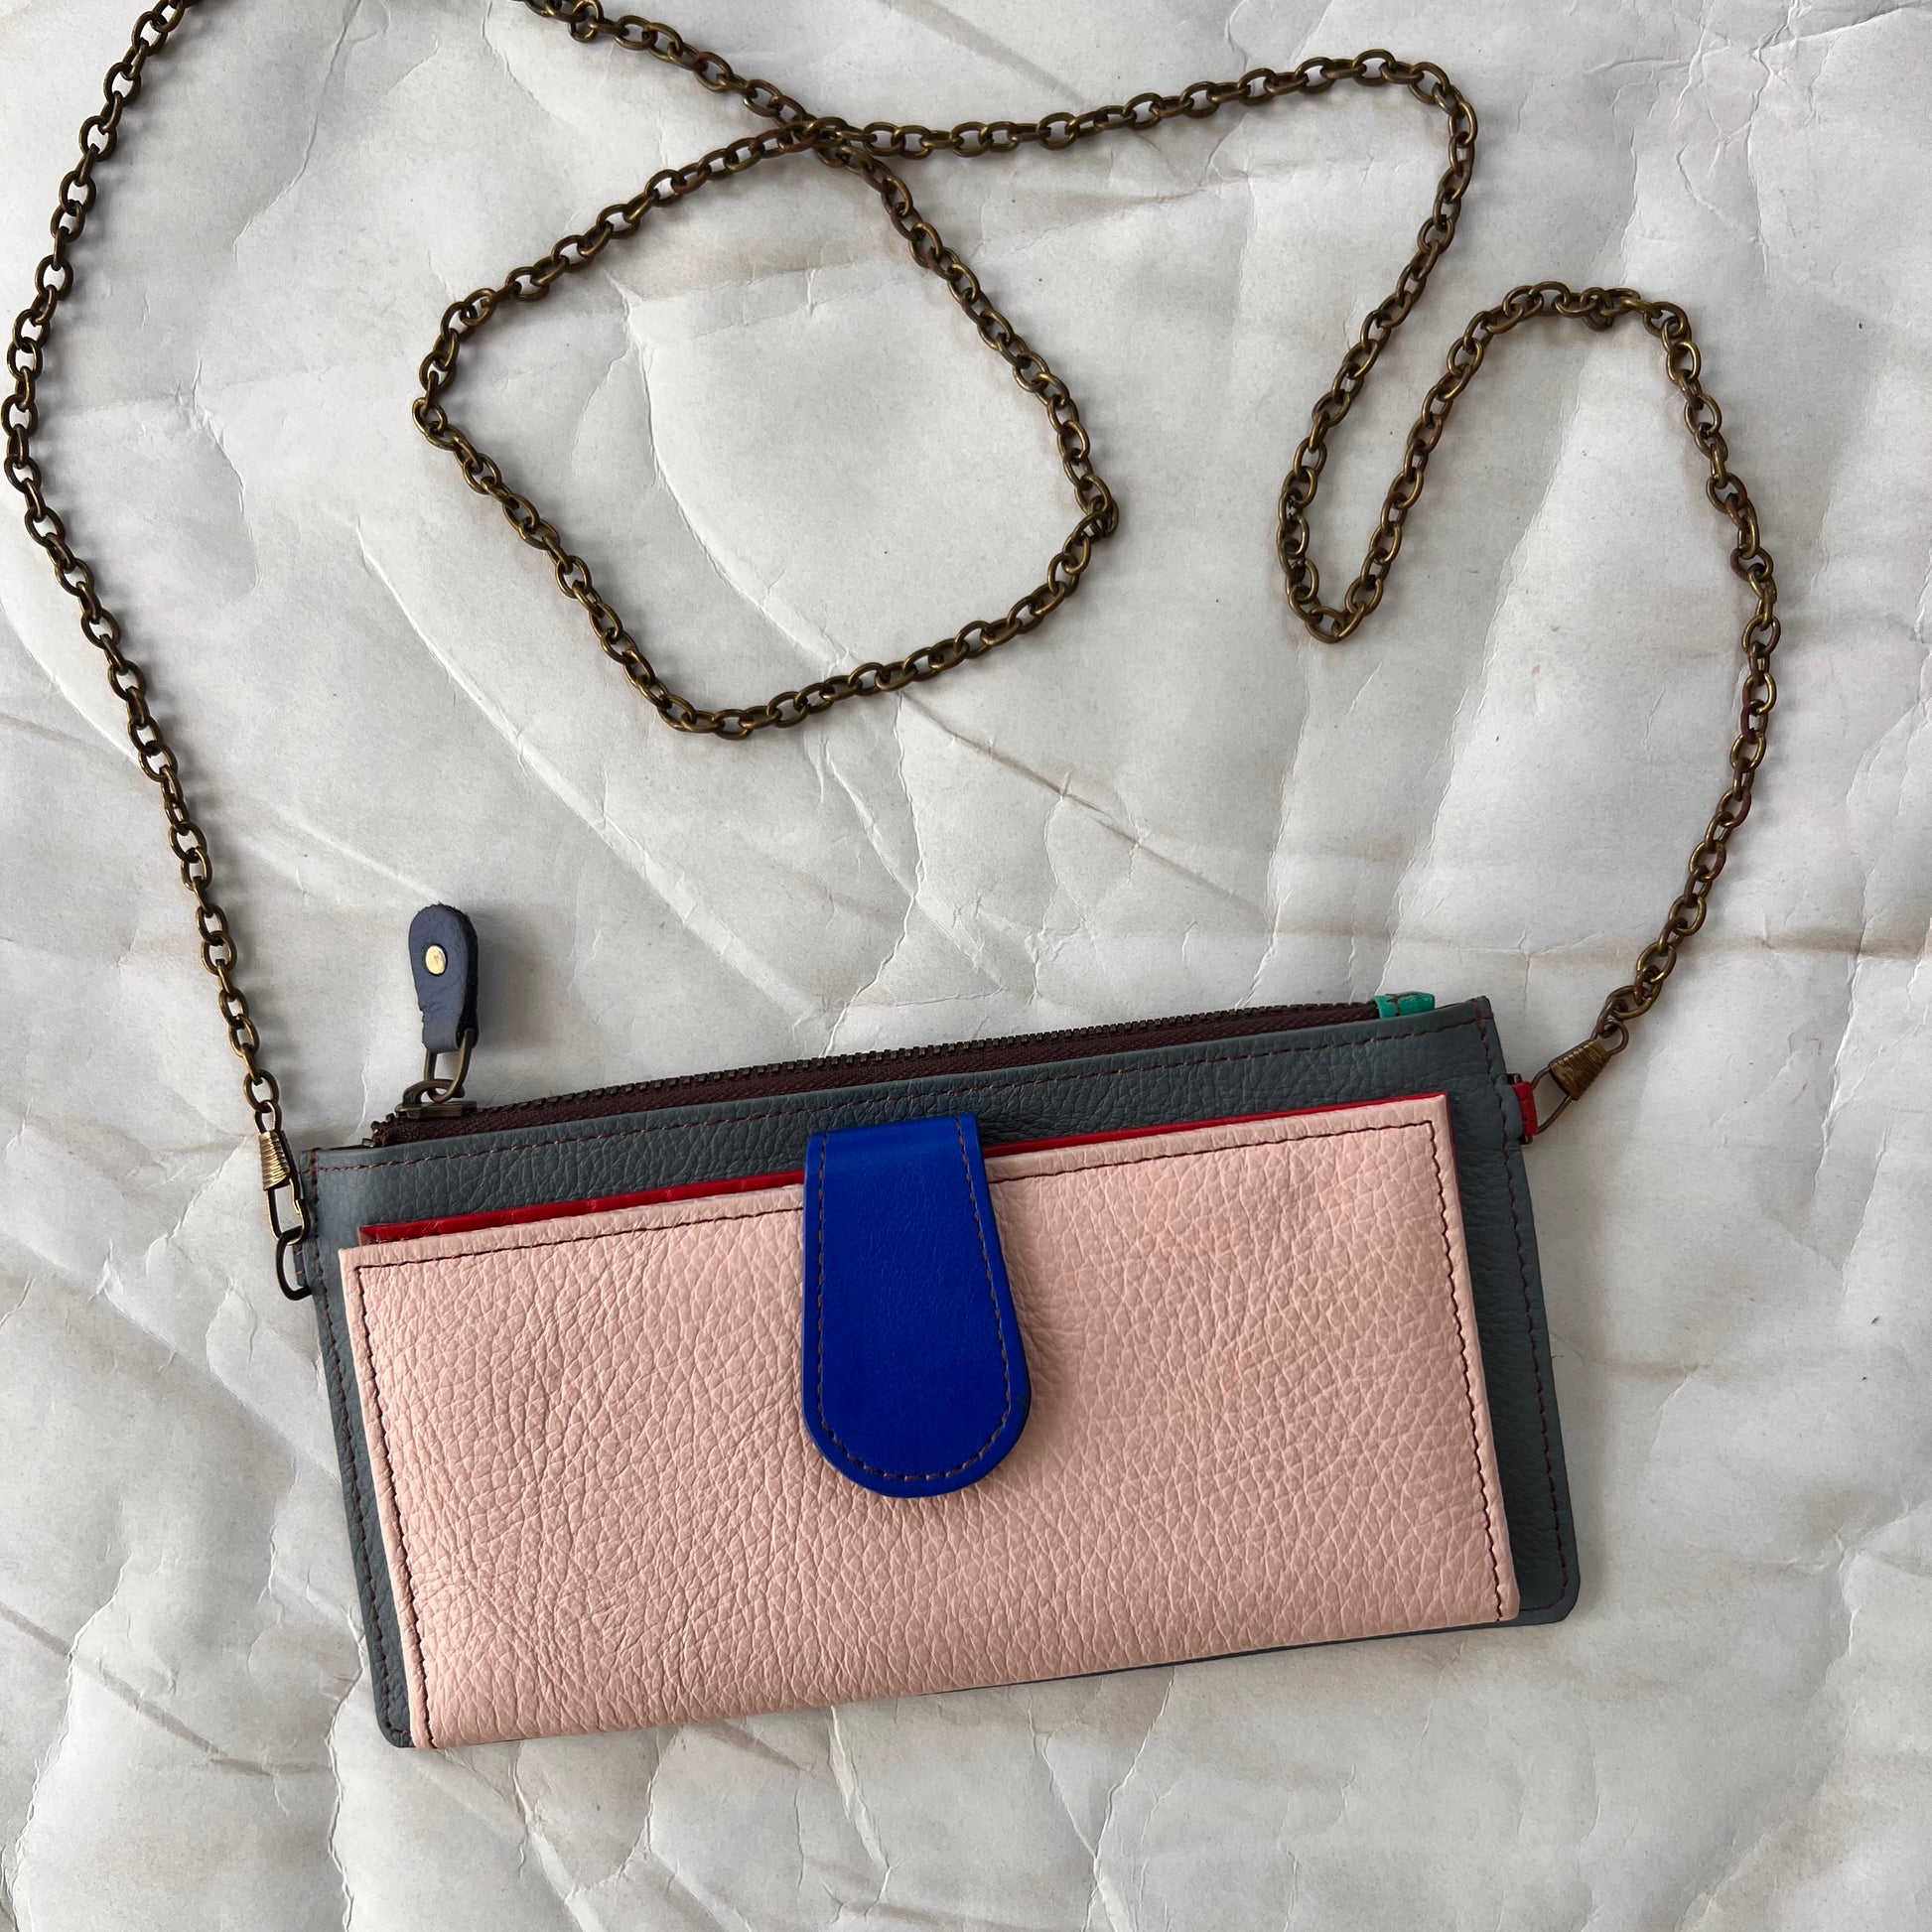 light pink kimber wallet with crossbody chain attached.